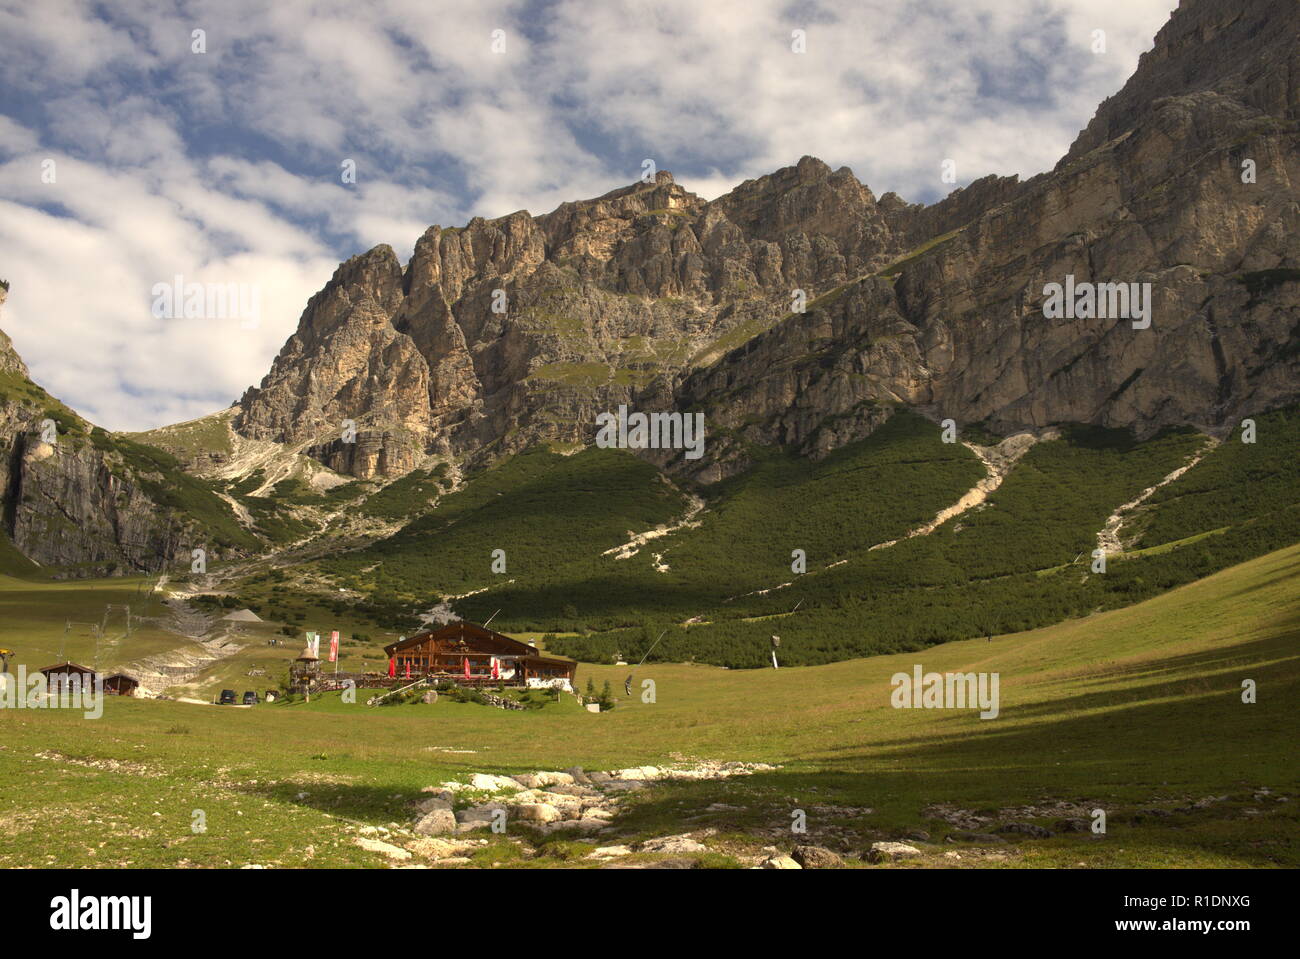 Mountain landscape with green mountain meadows and forest in the Italian Dolomites Stock Photo